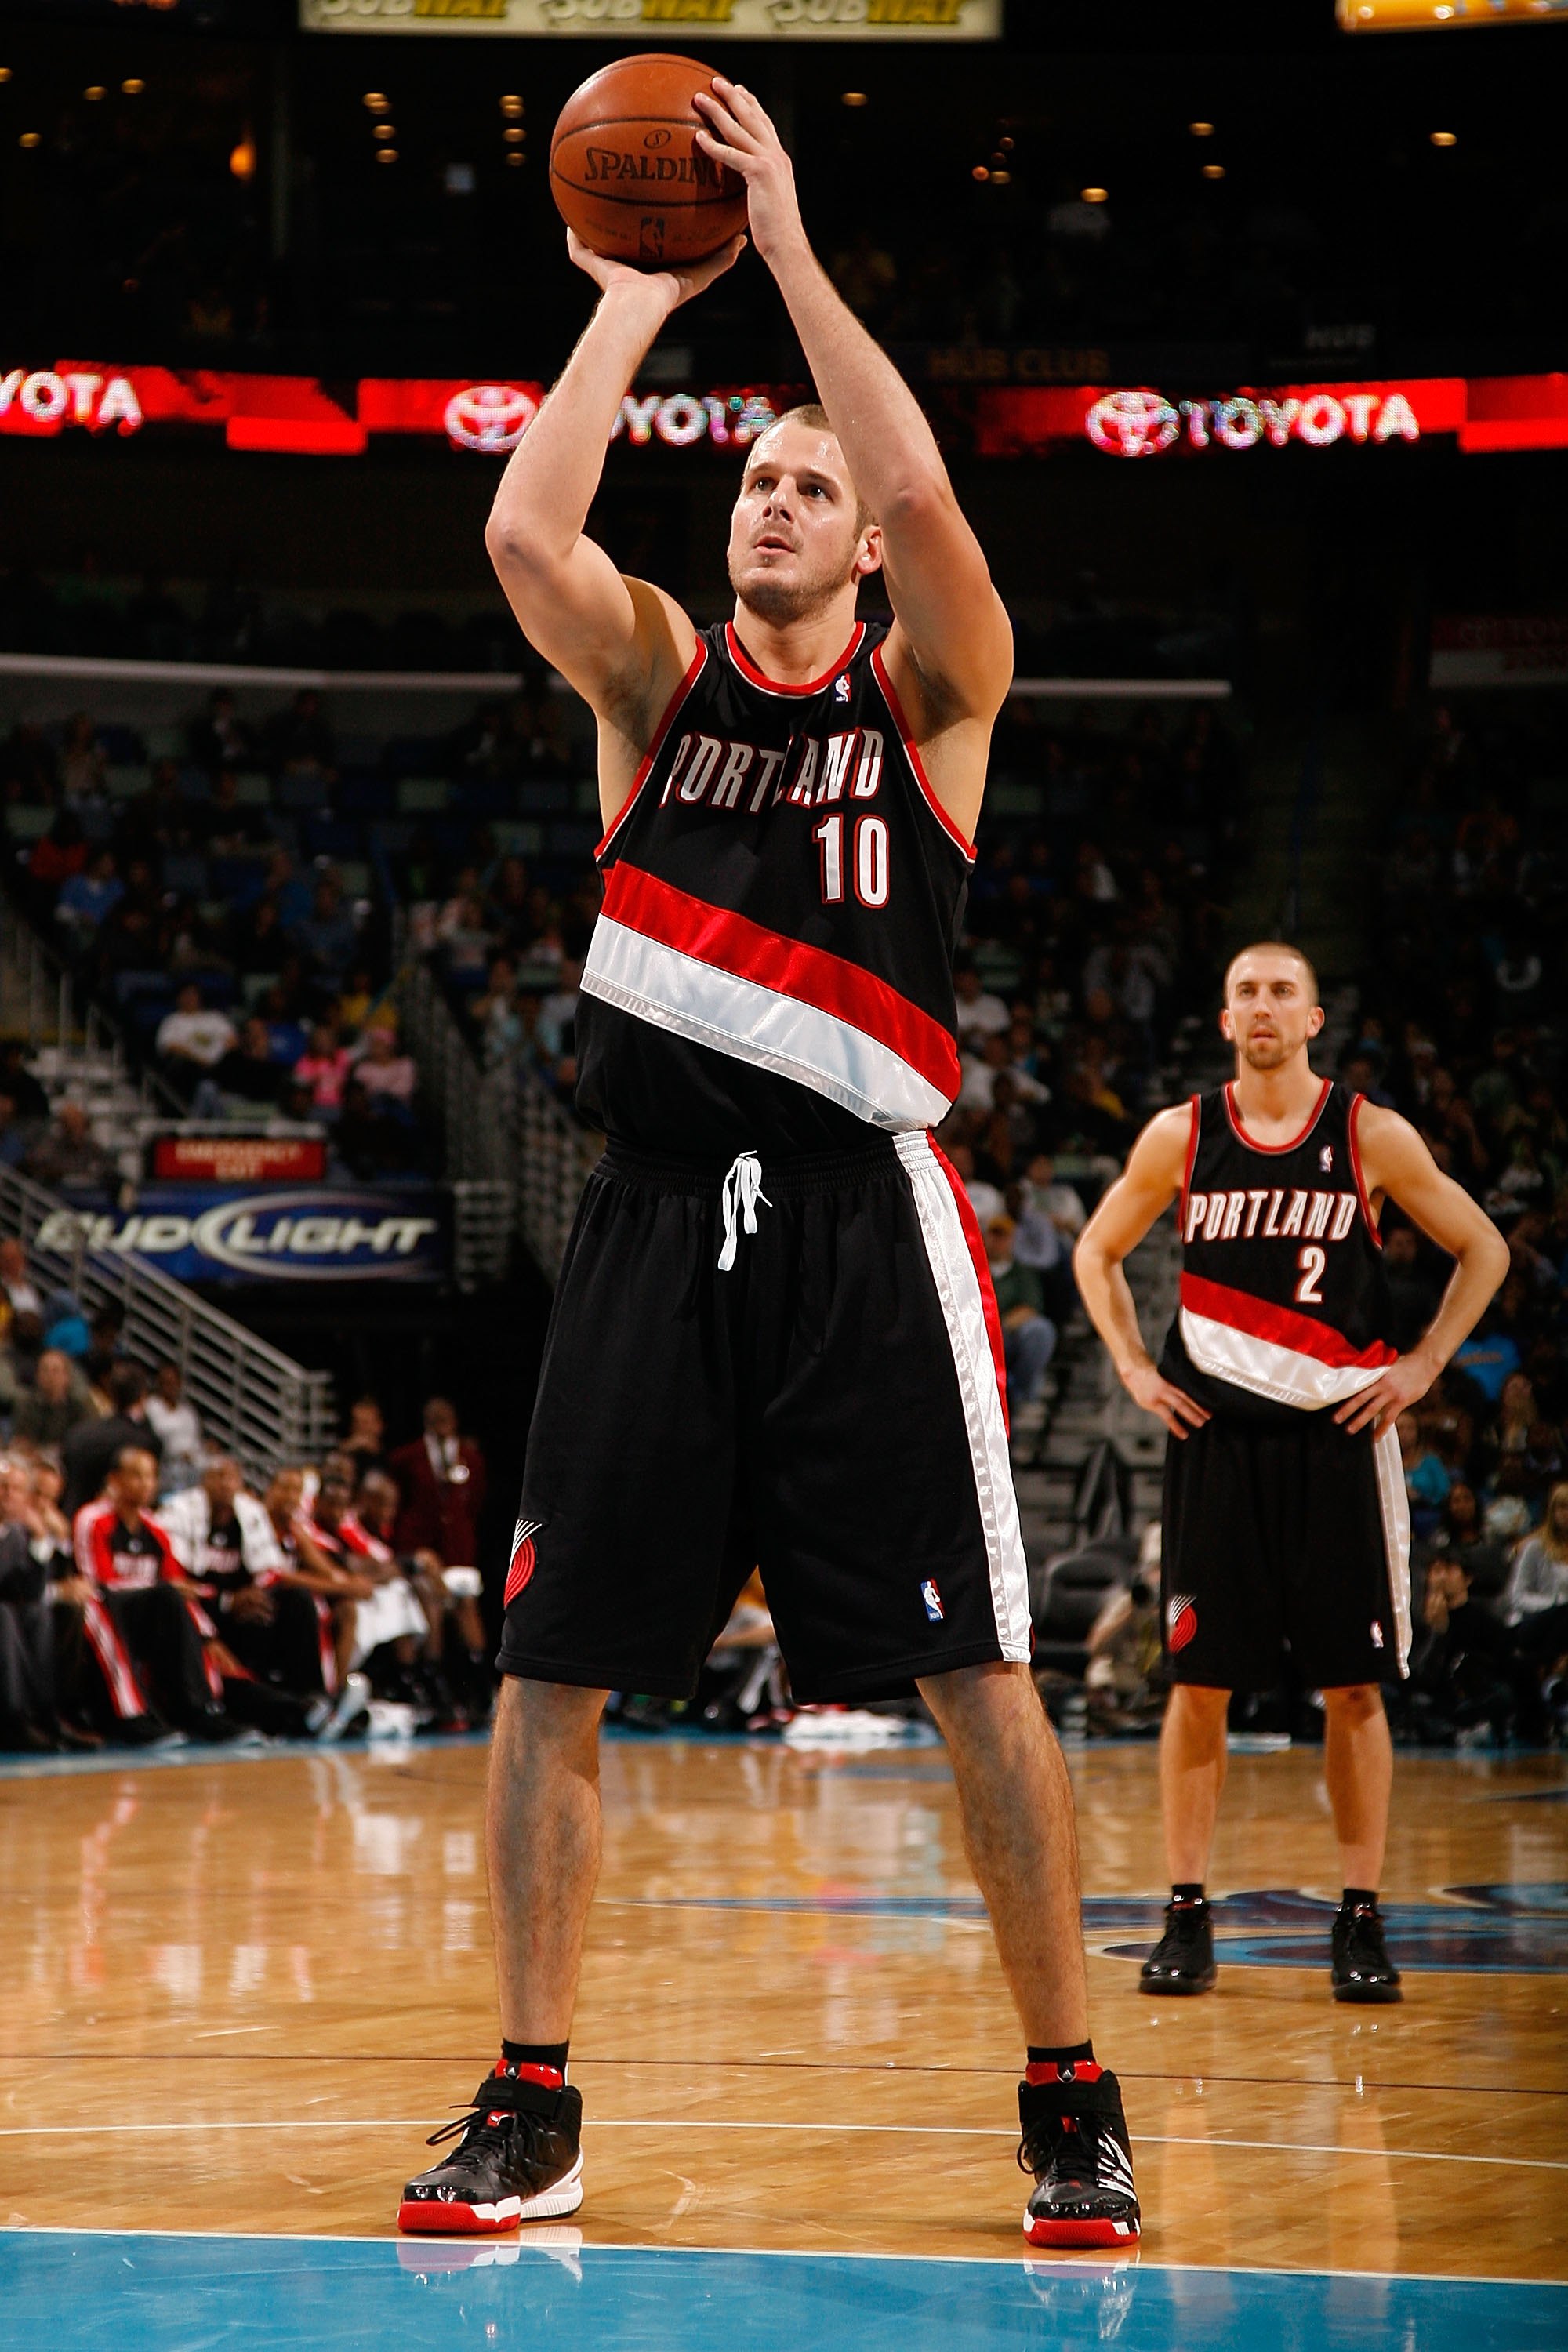 NEW ORLEANS - NOVEMBER 13:  Joel Przybilla #10 of the Portland Trail Blazers shoots a free throw against the New Orleans Hornets at the New Orleans Arena on November 13, 2009 in New Orleans, Louisiana.  NOTE TO USER: User expressly acknowledges and agrees